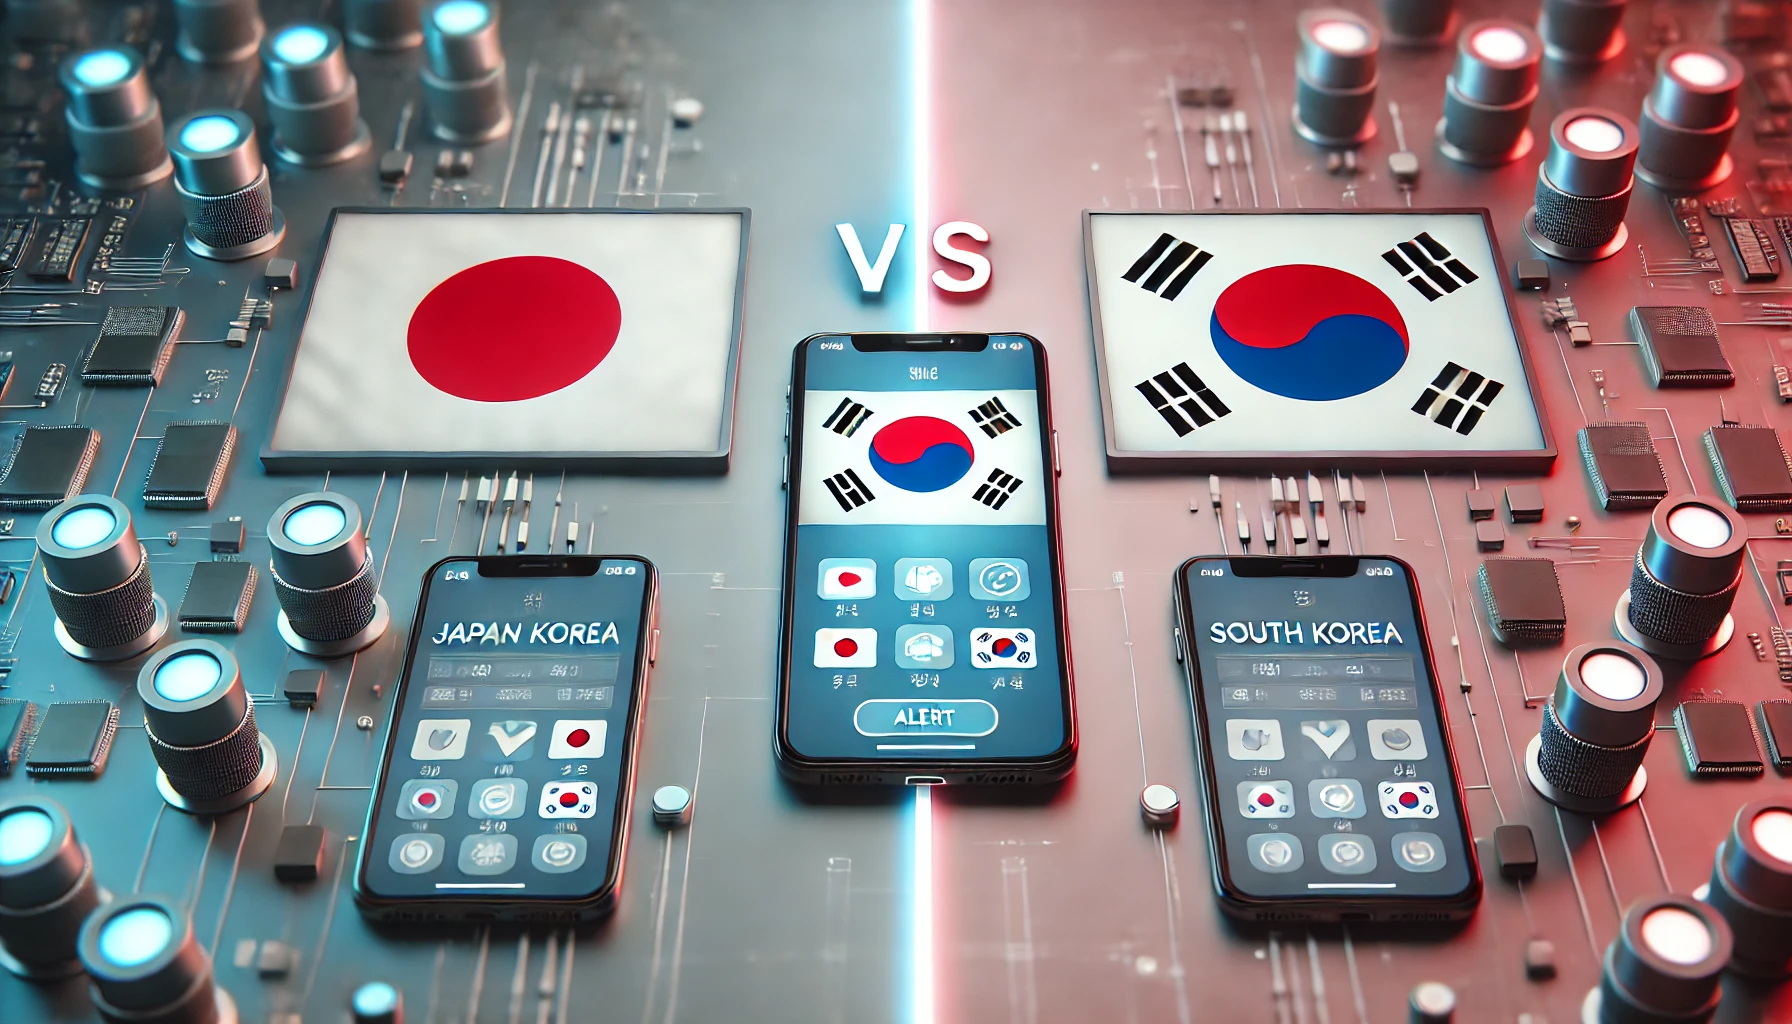 Japan and South Korea clash over an app amidst heightened tensions